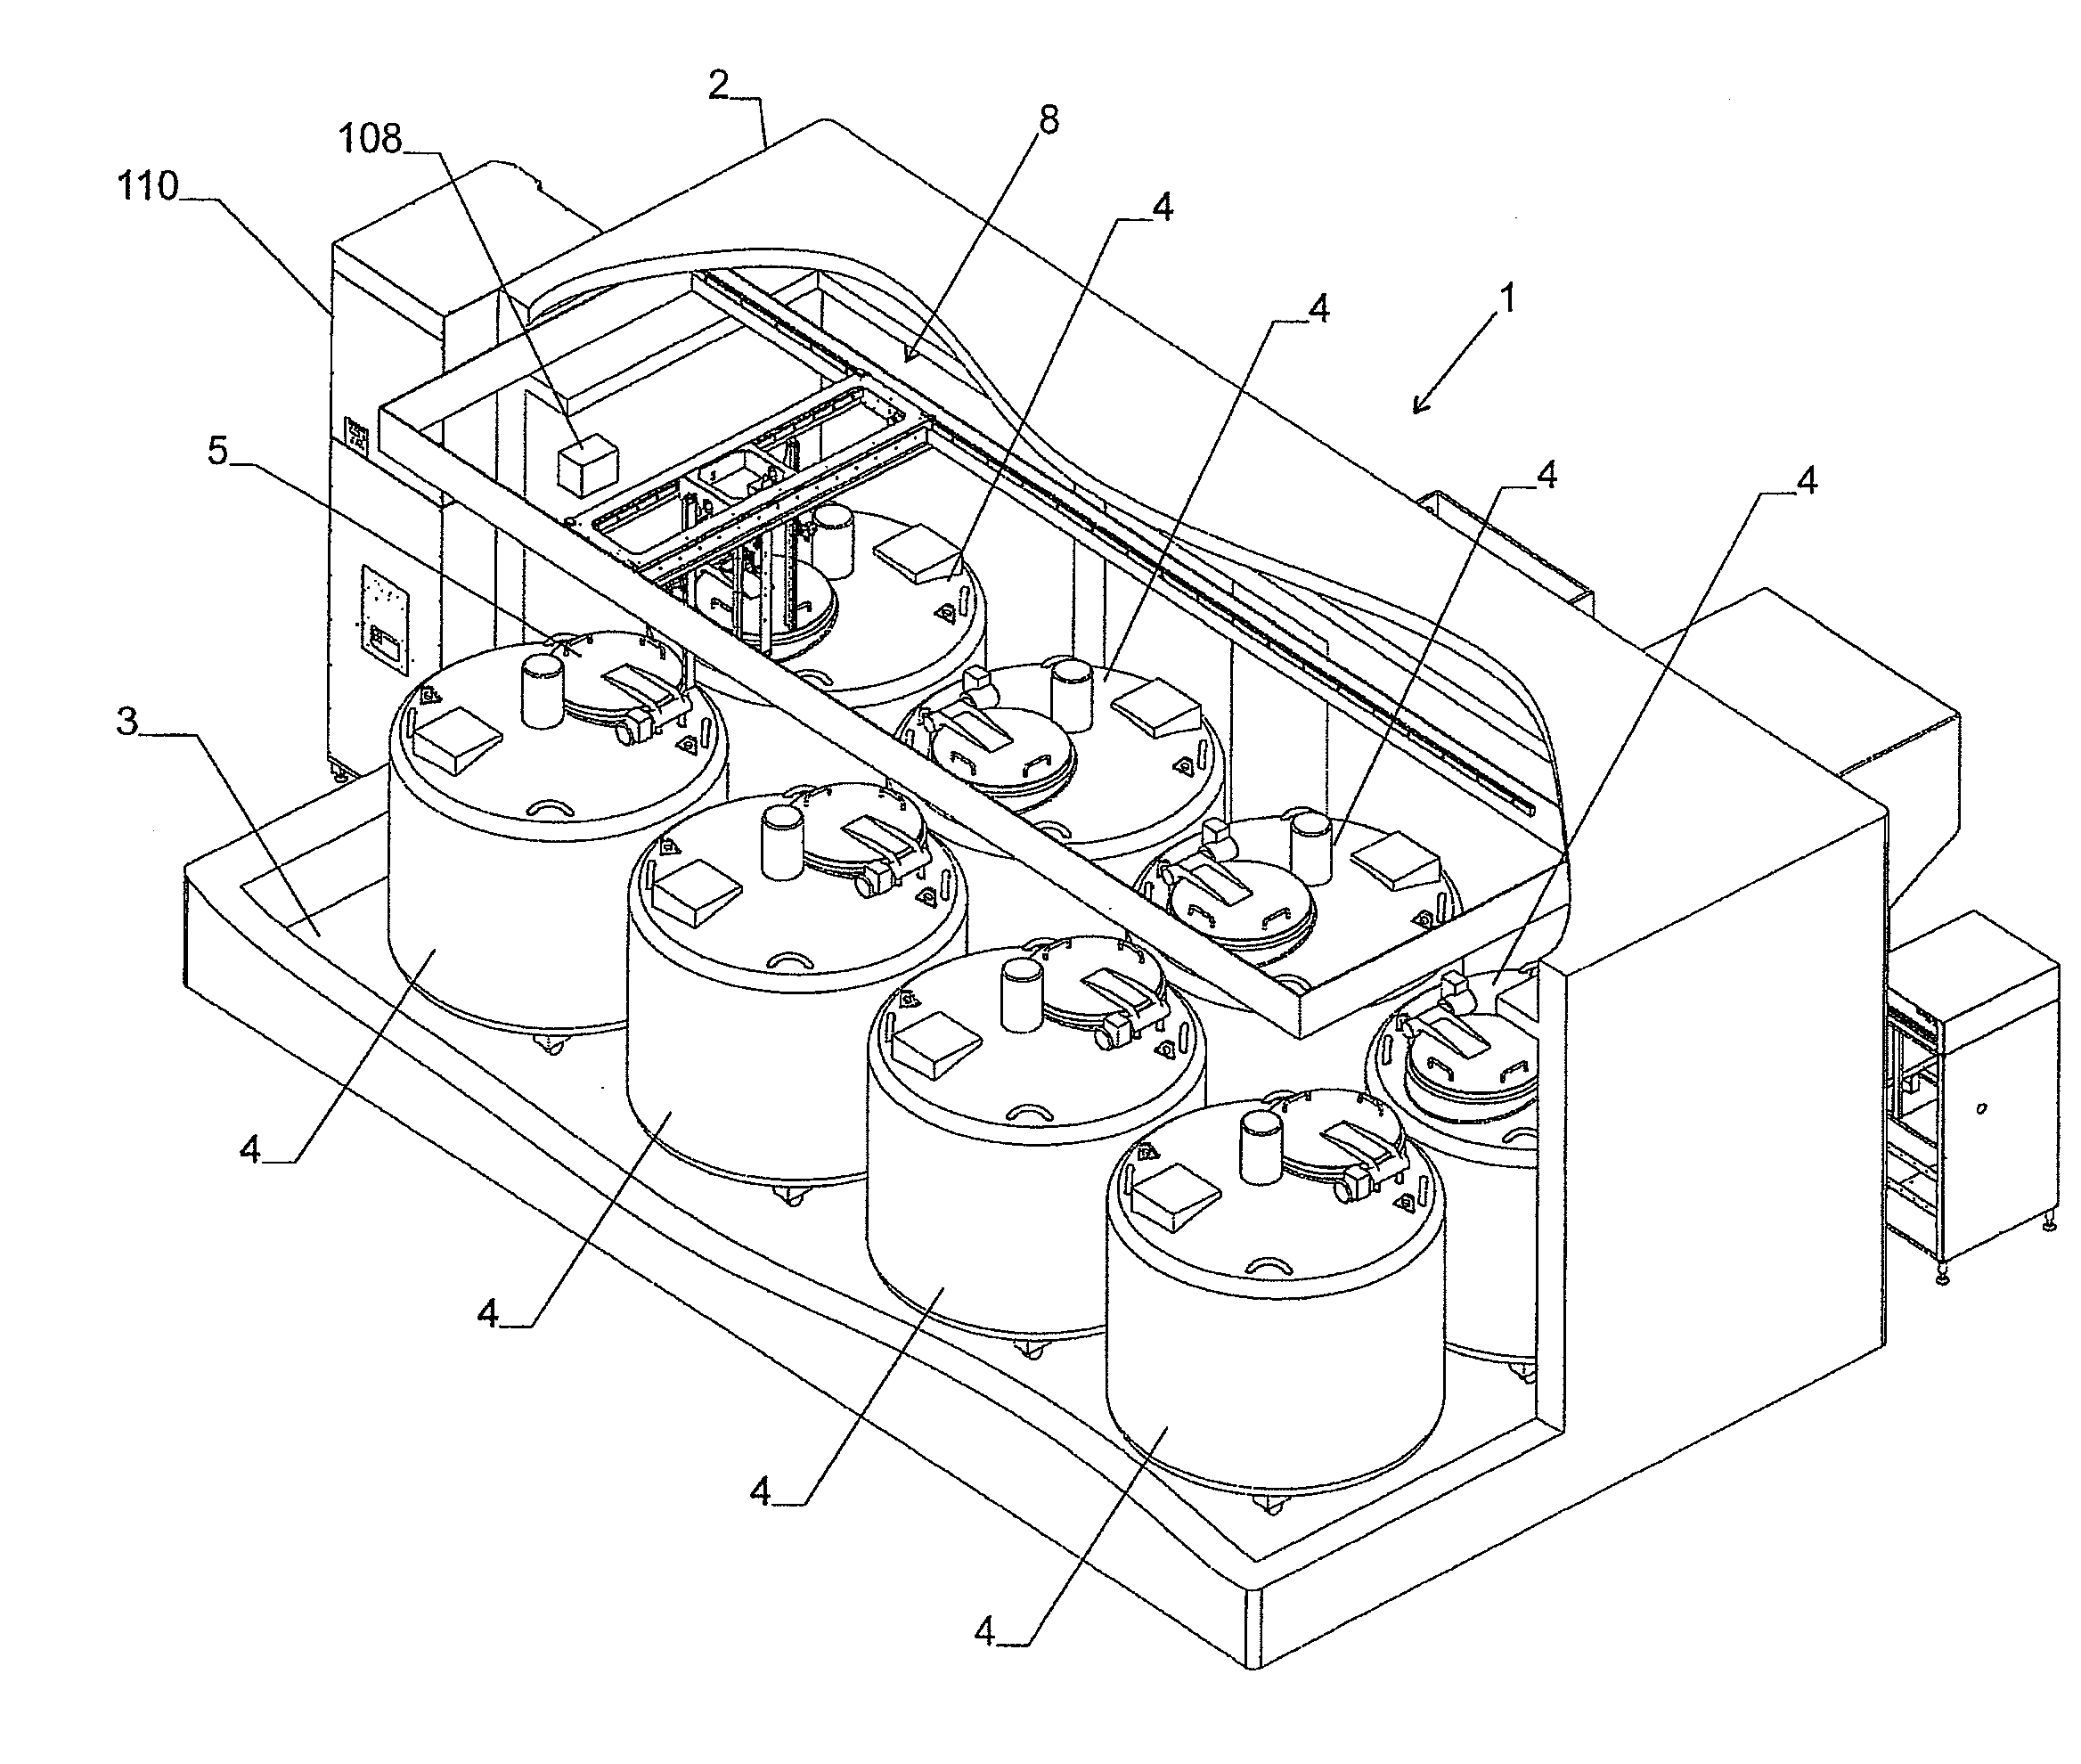 Storage system for storing laboratory objects at low temperatures